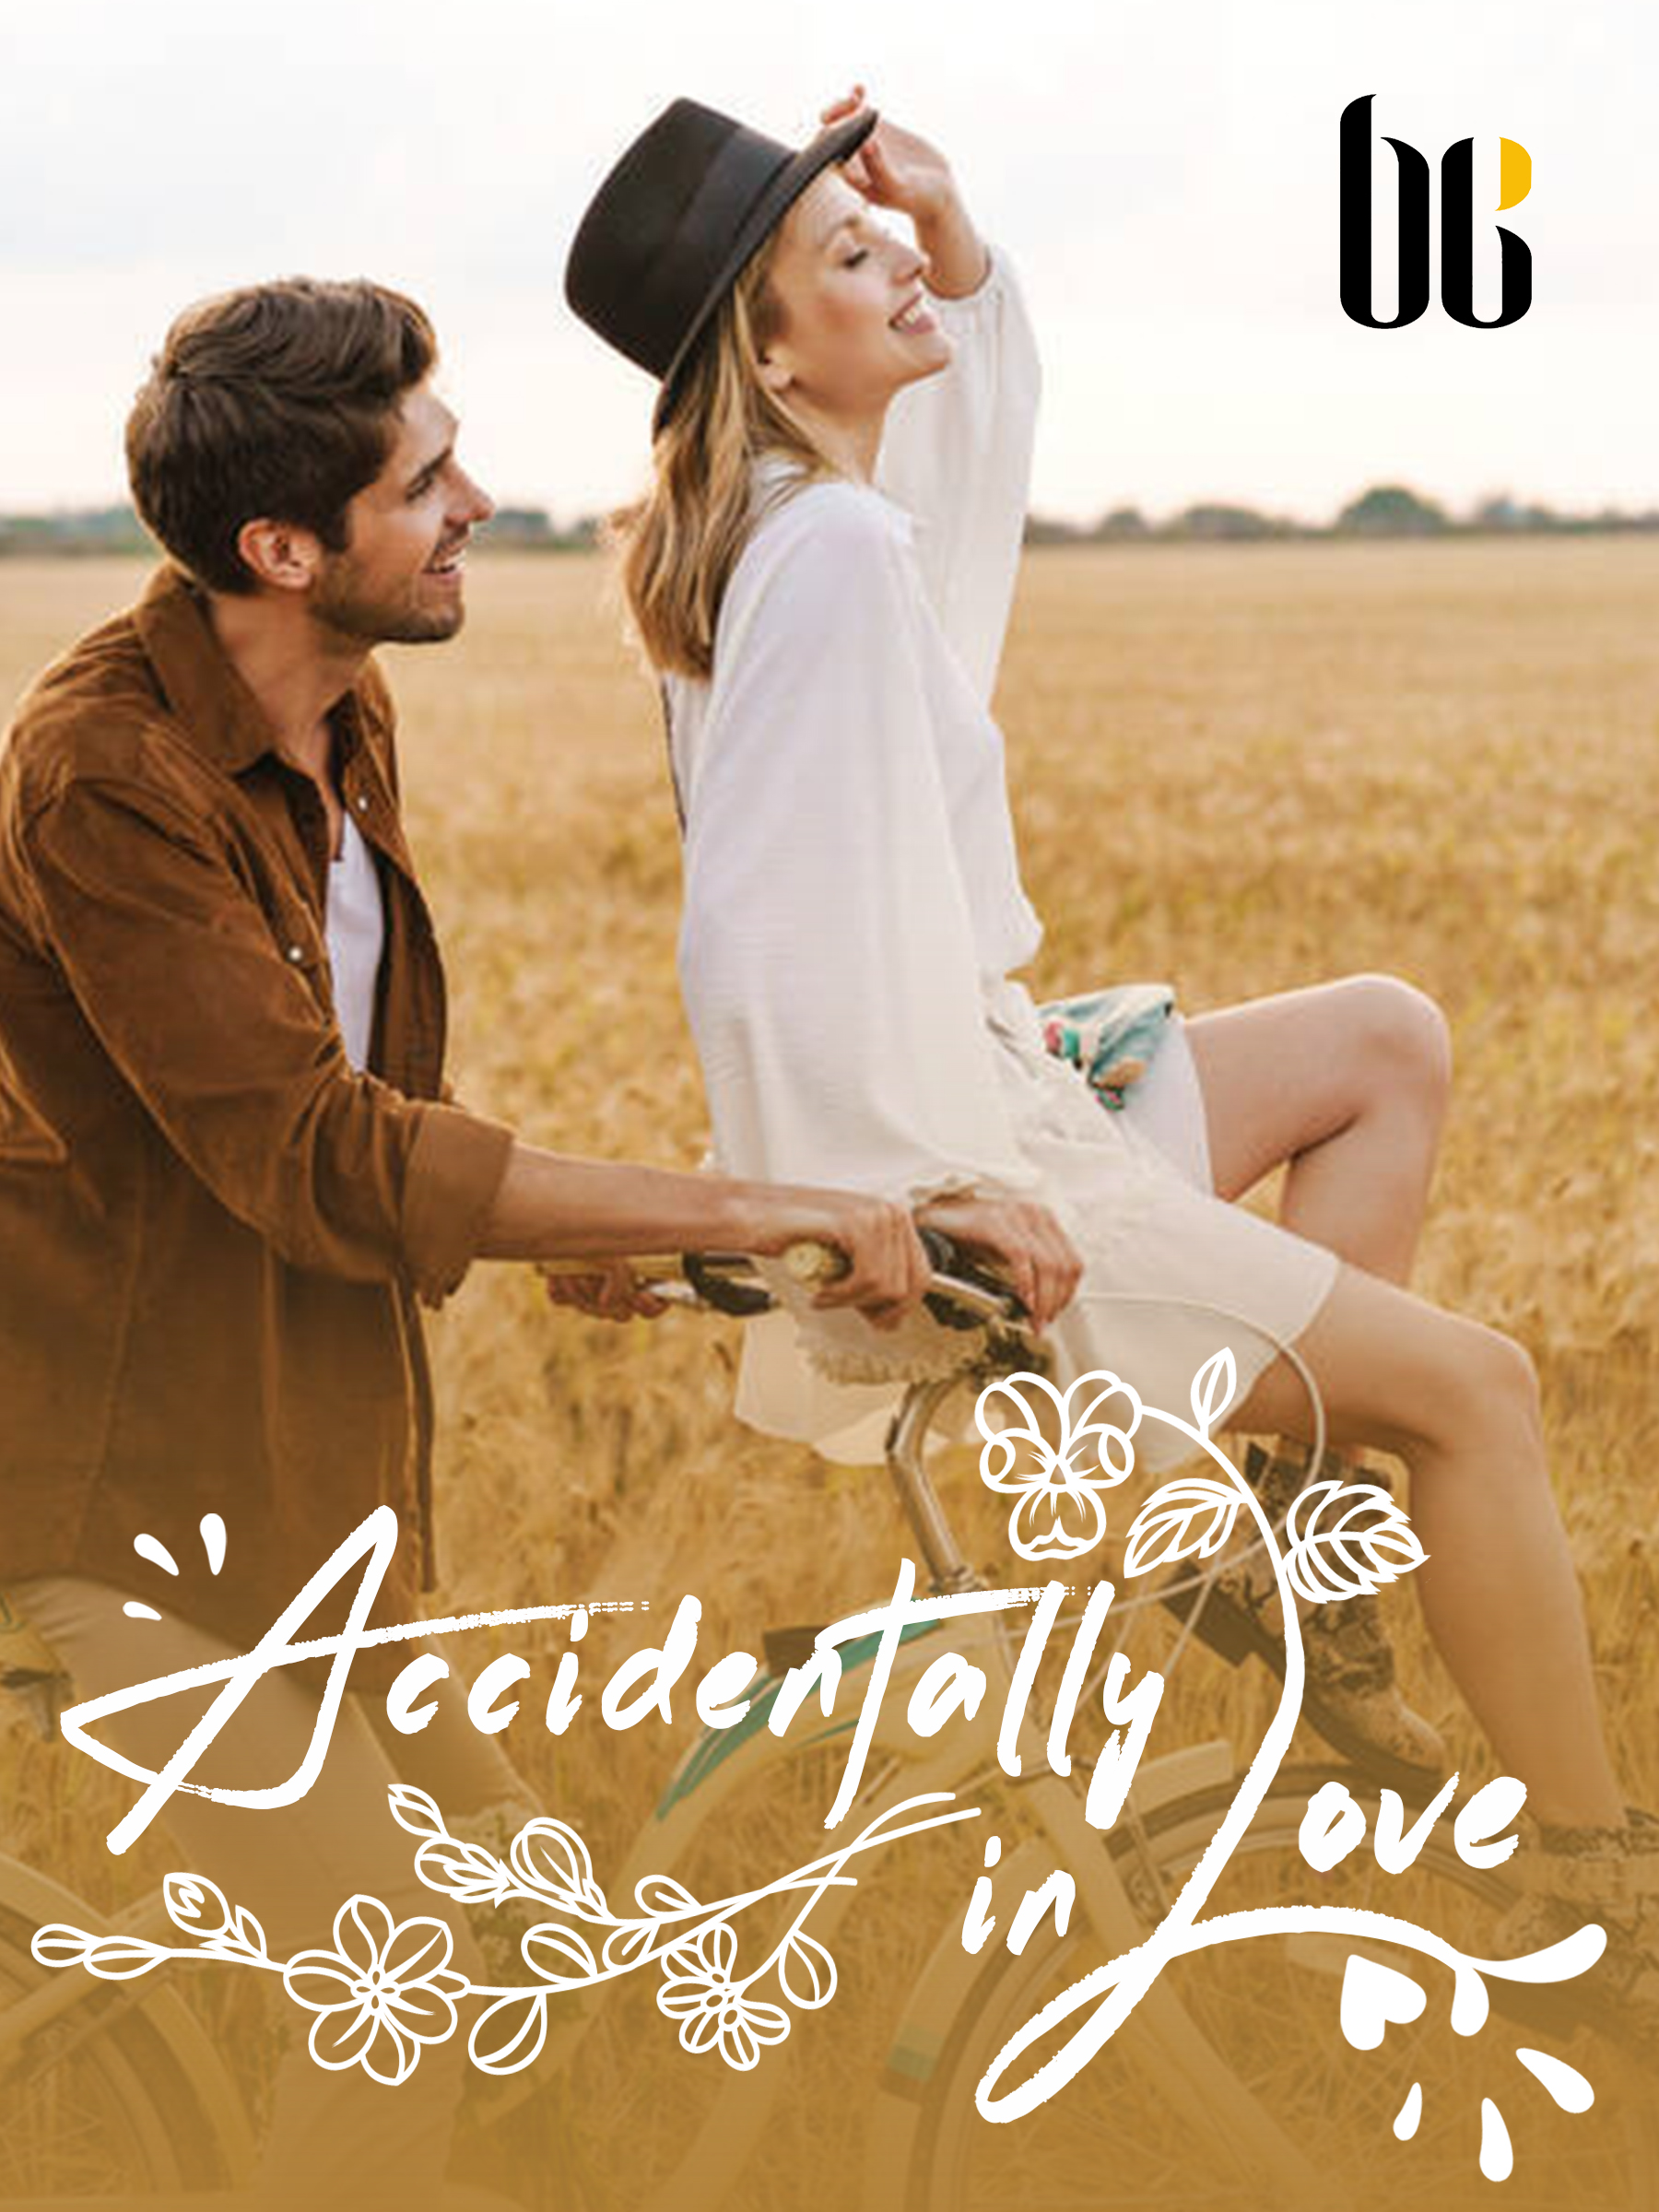 accidentally in love full book pdf download